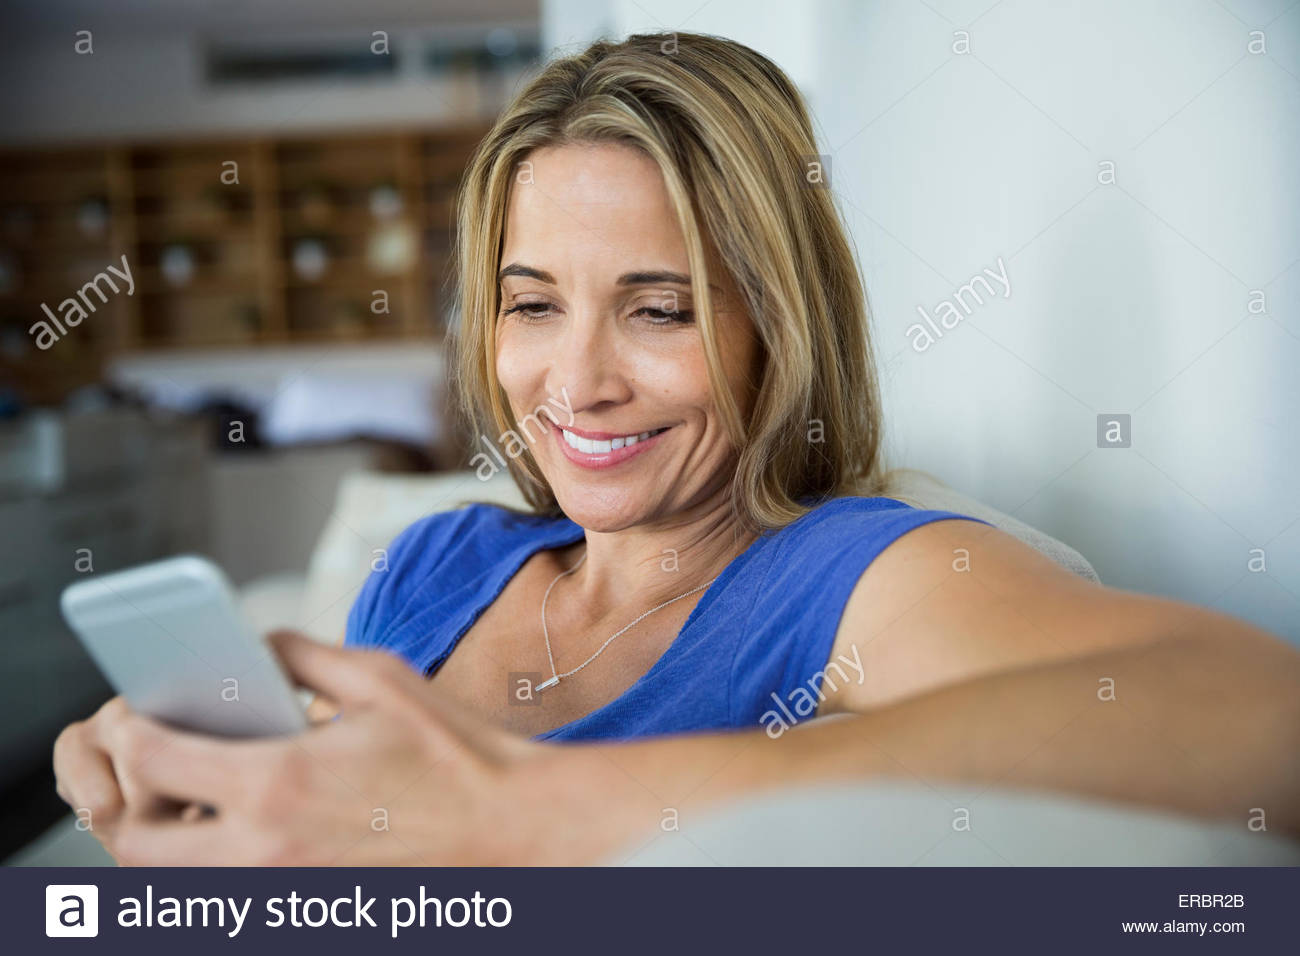 Smiling blonde woman texting with cell phone Stock Photo